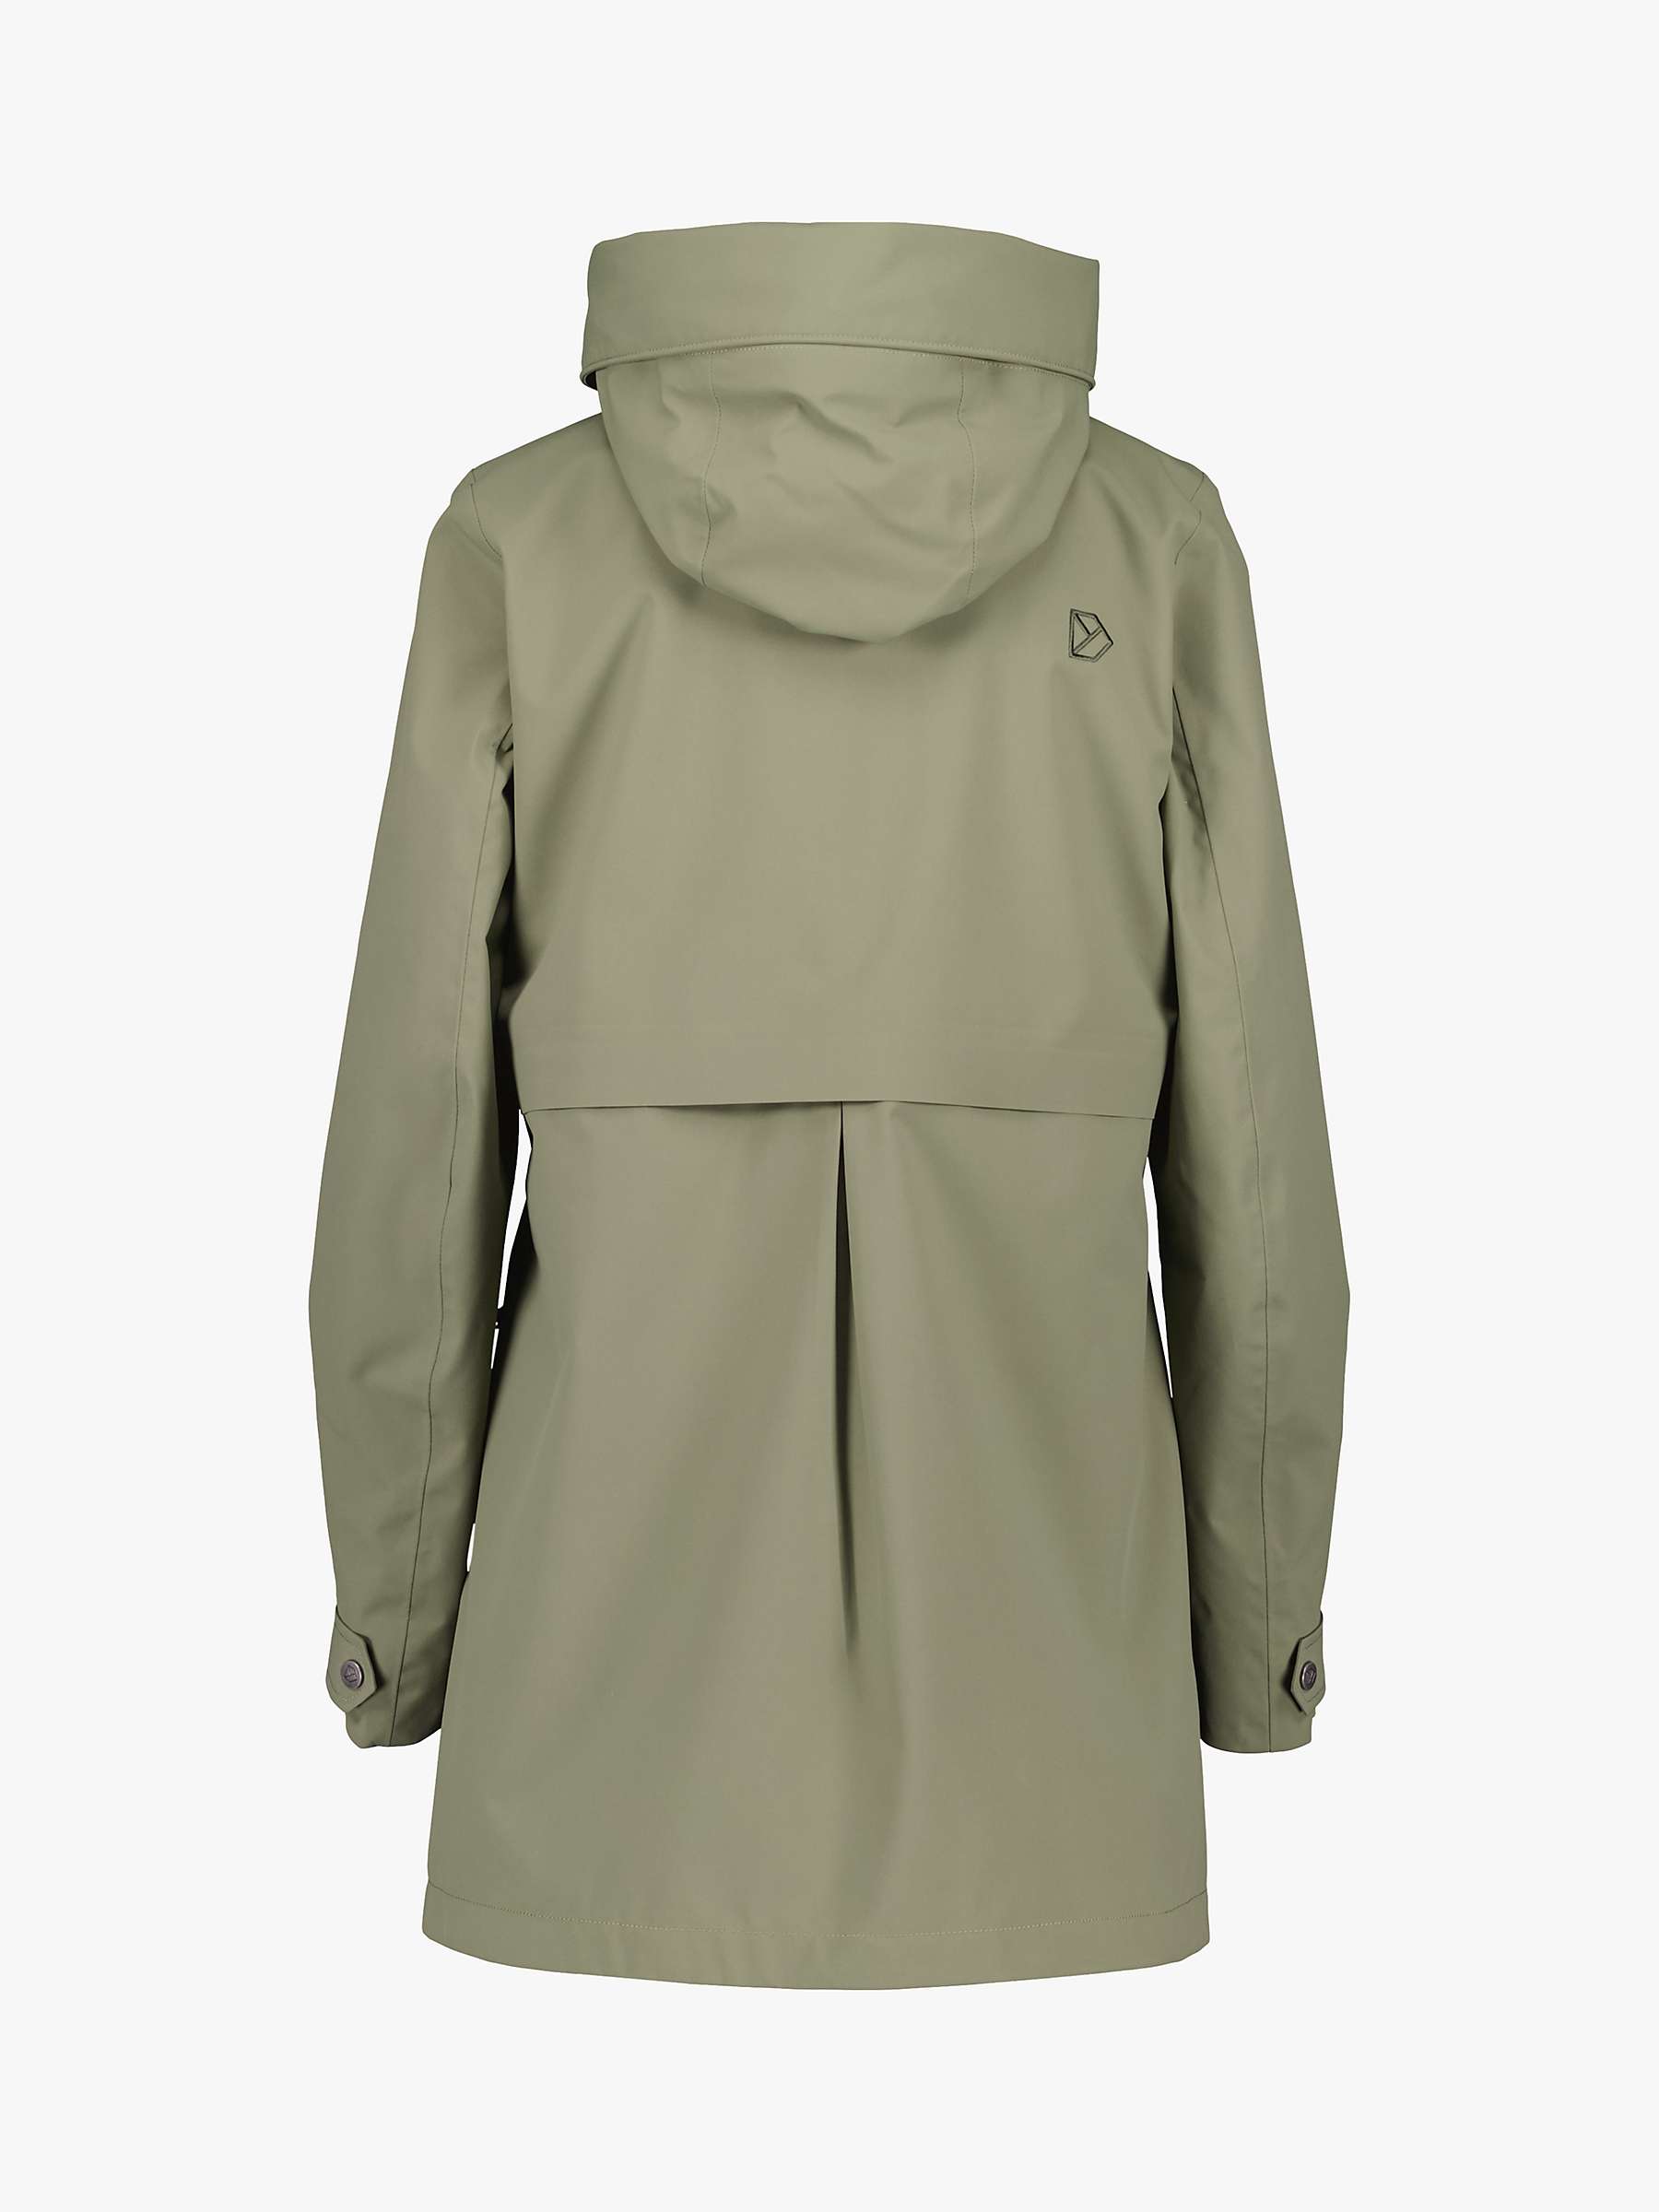 Buy Didriksons Edith Parka Jacket Online at johnlewis.com